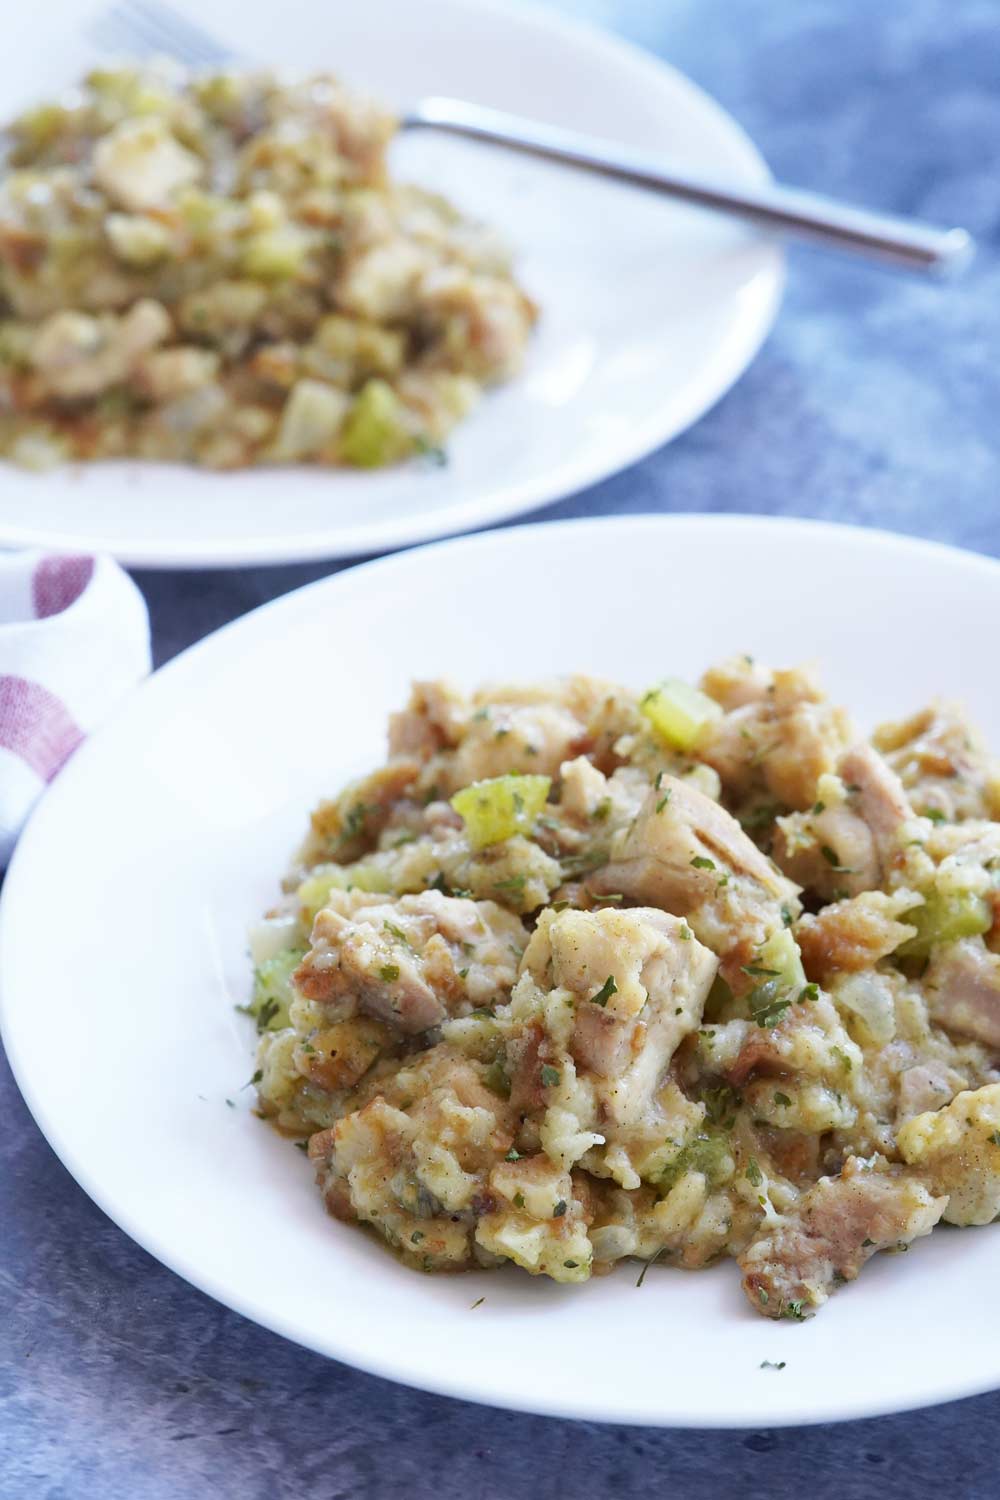 A helping of chicken stuffing casserole on a plate.